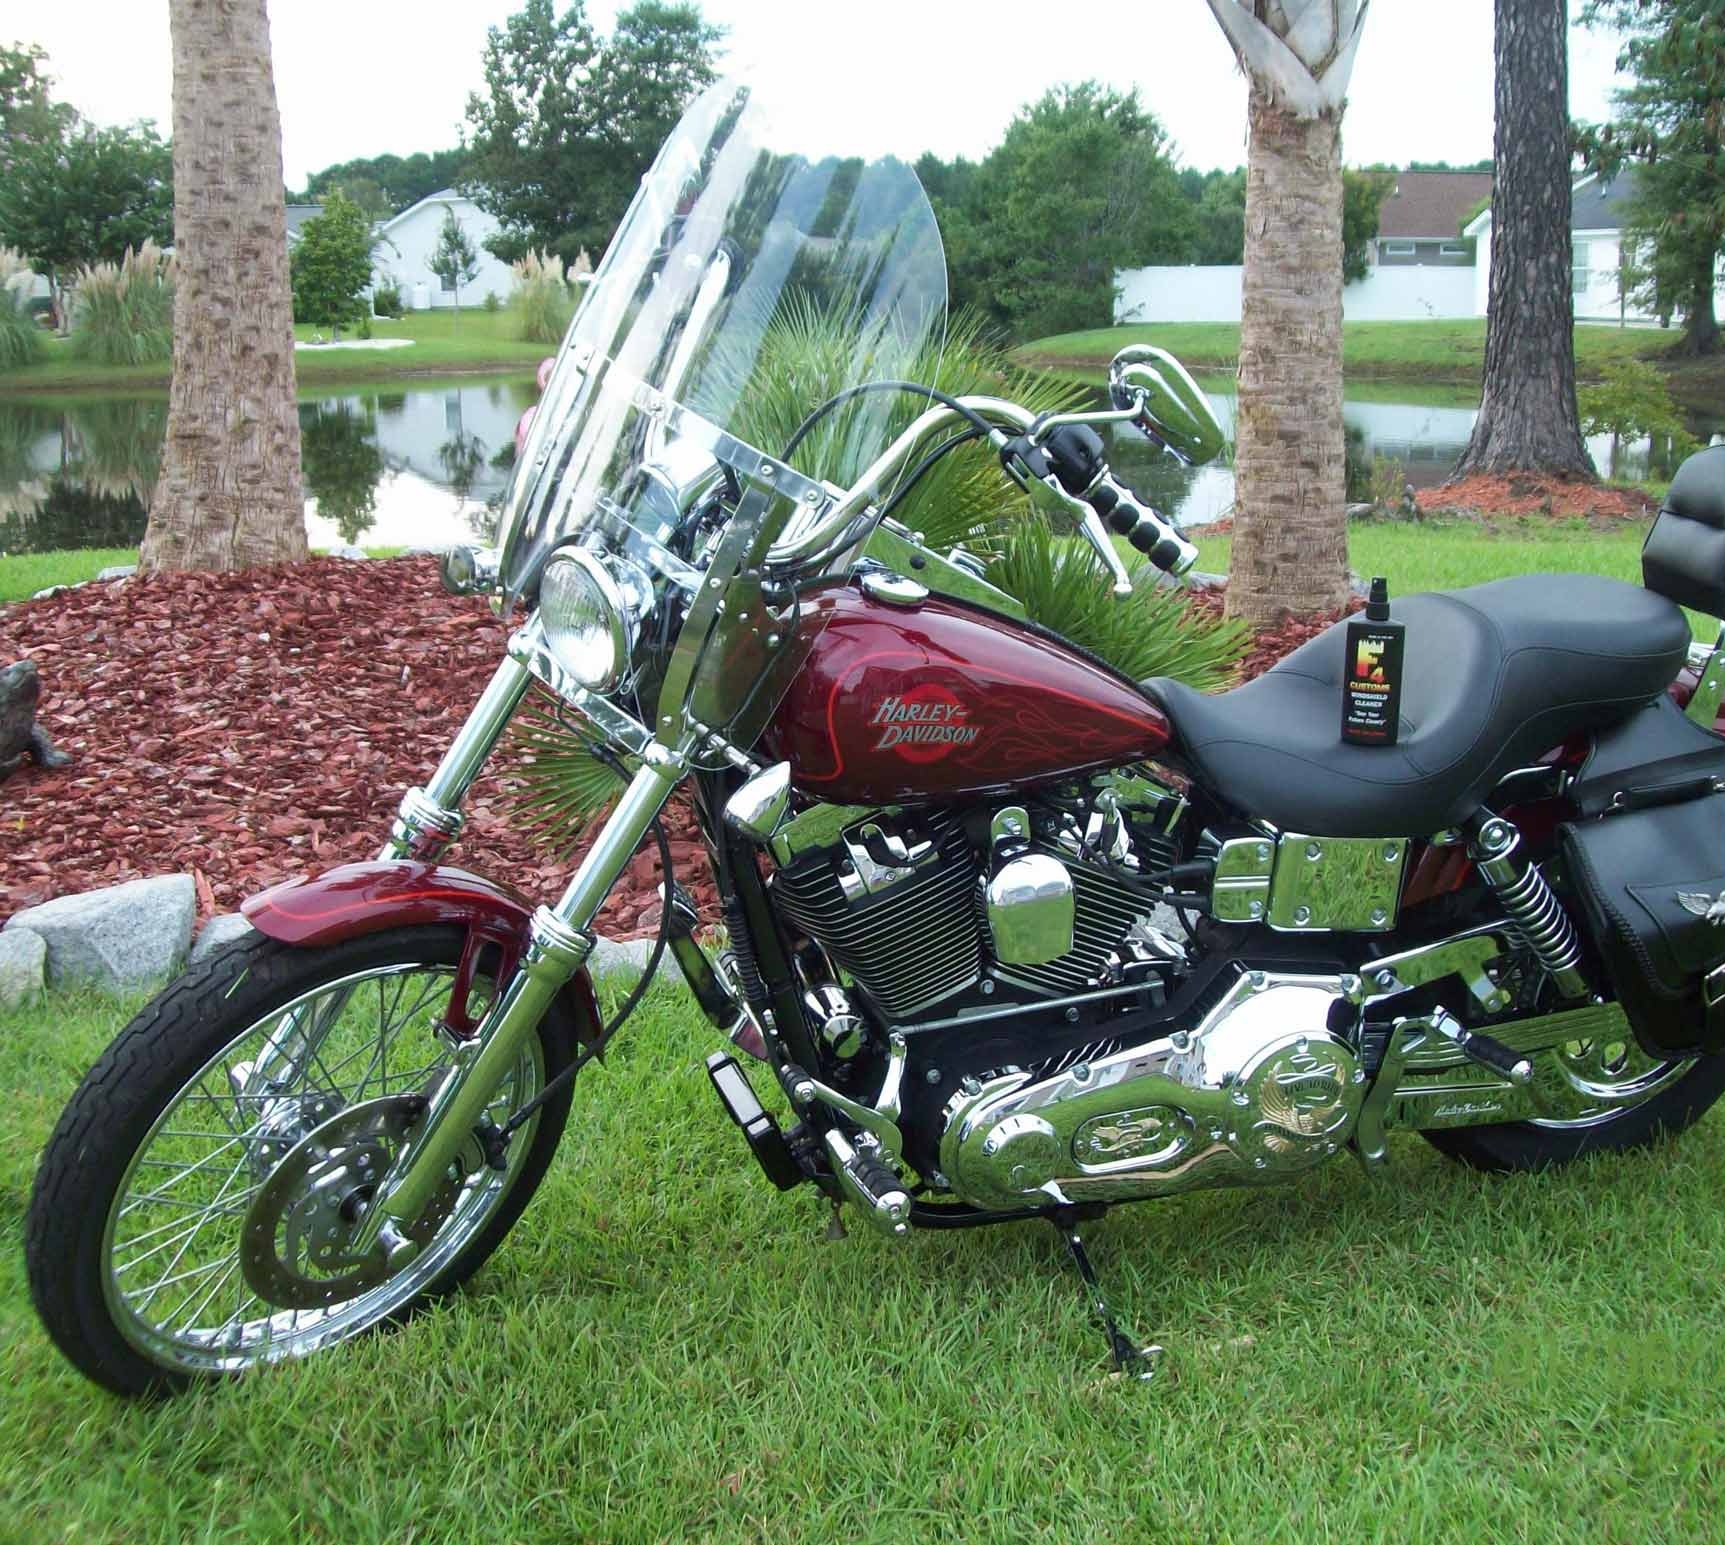 Replacement Windshield for HD Dyna Demo